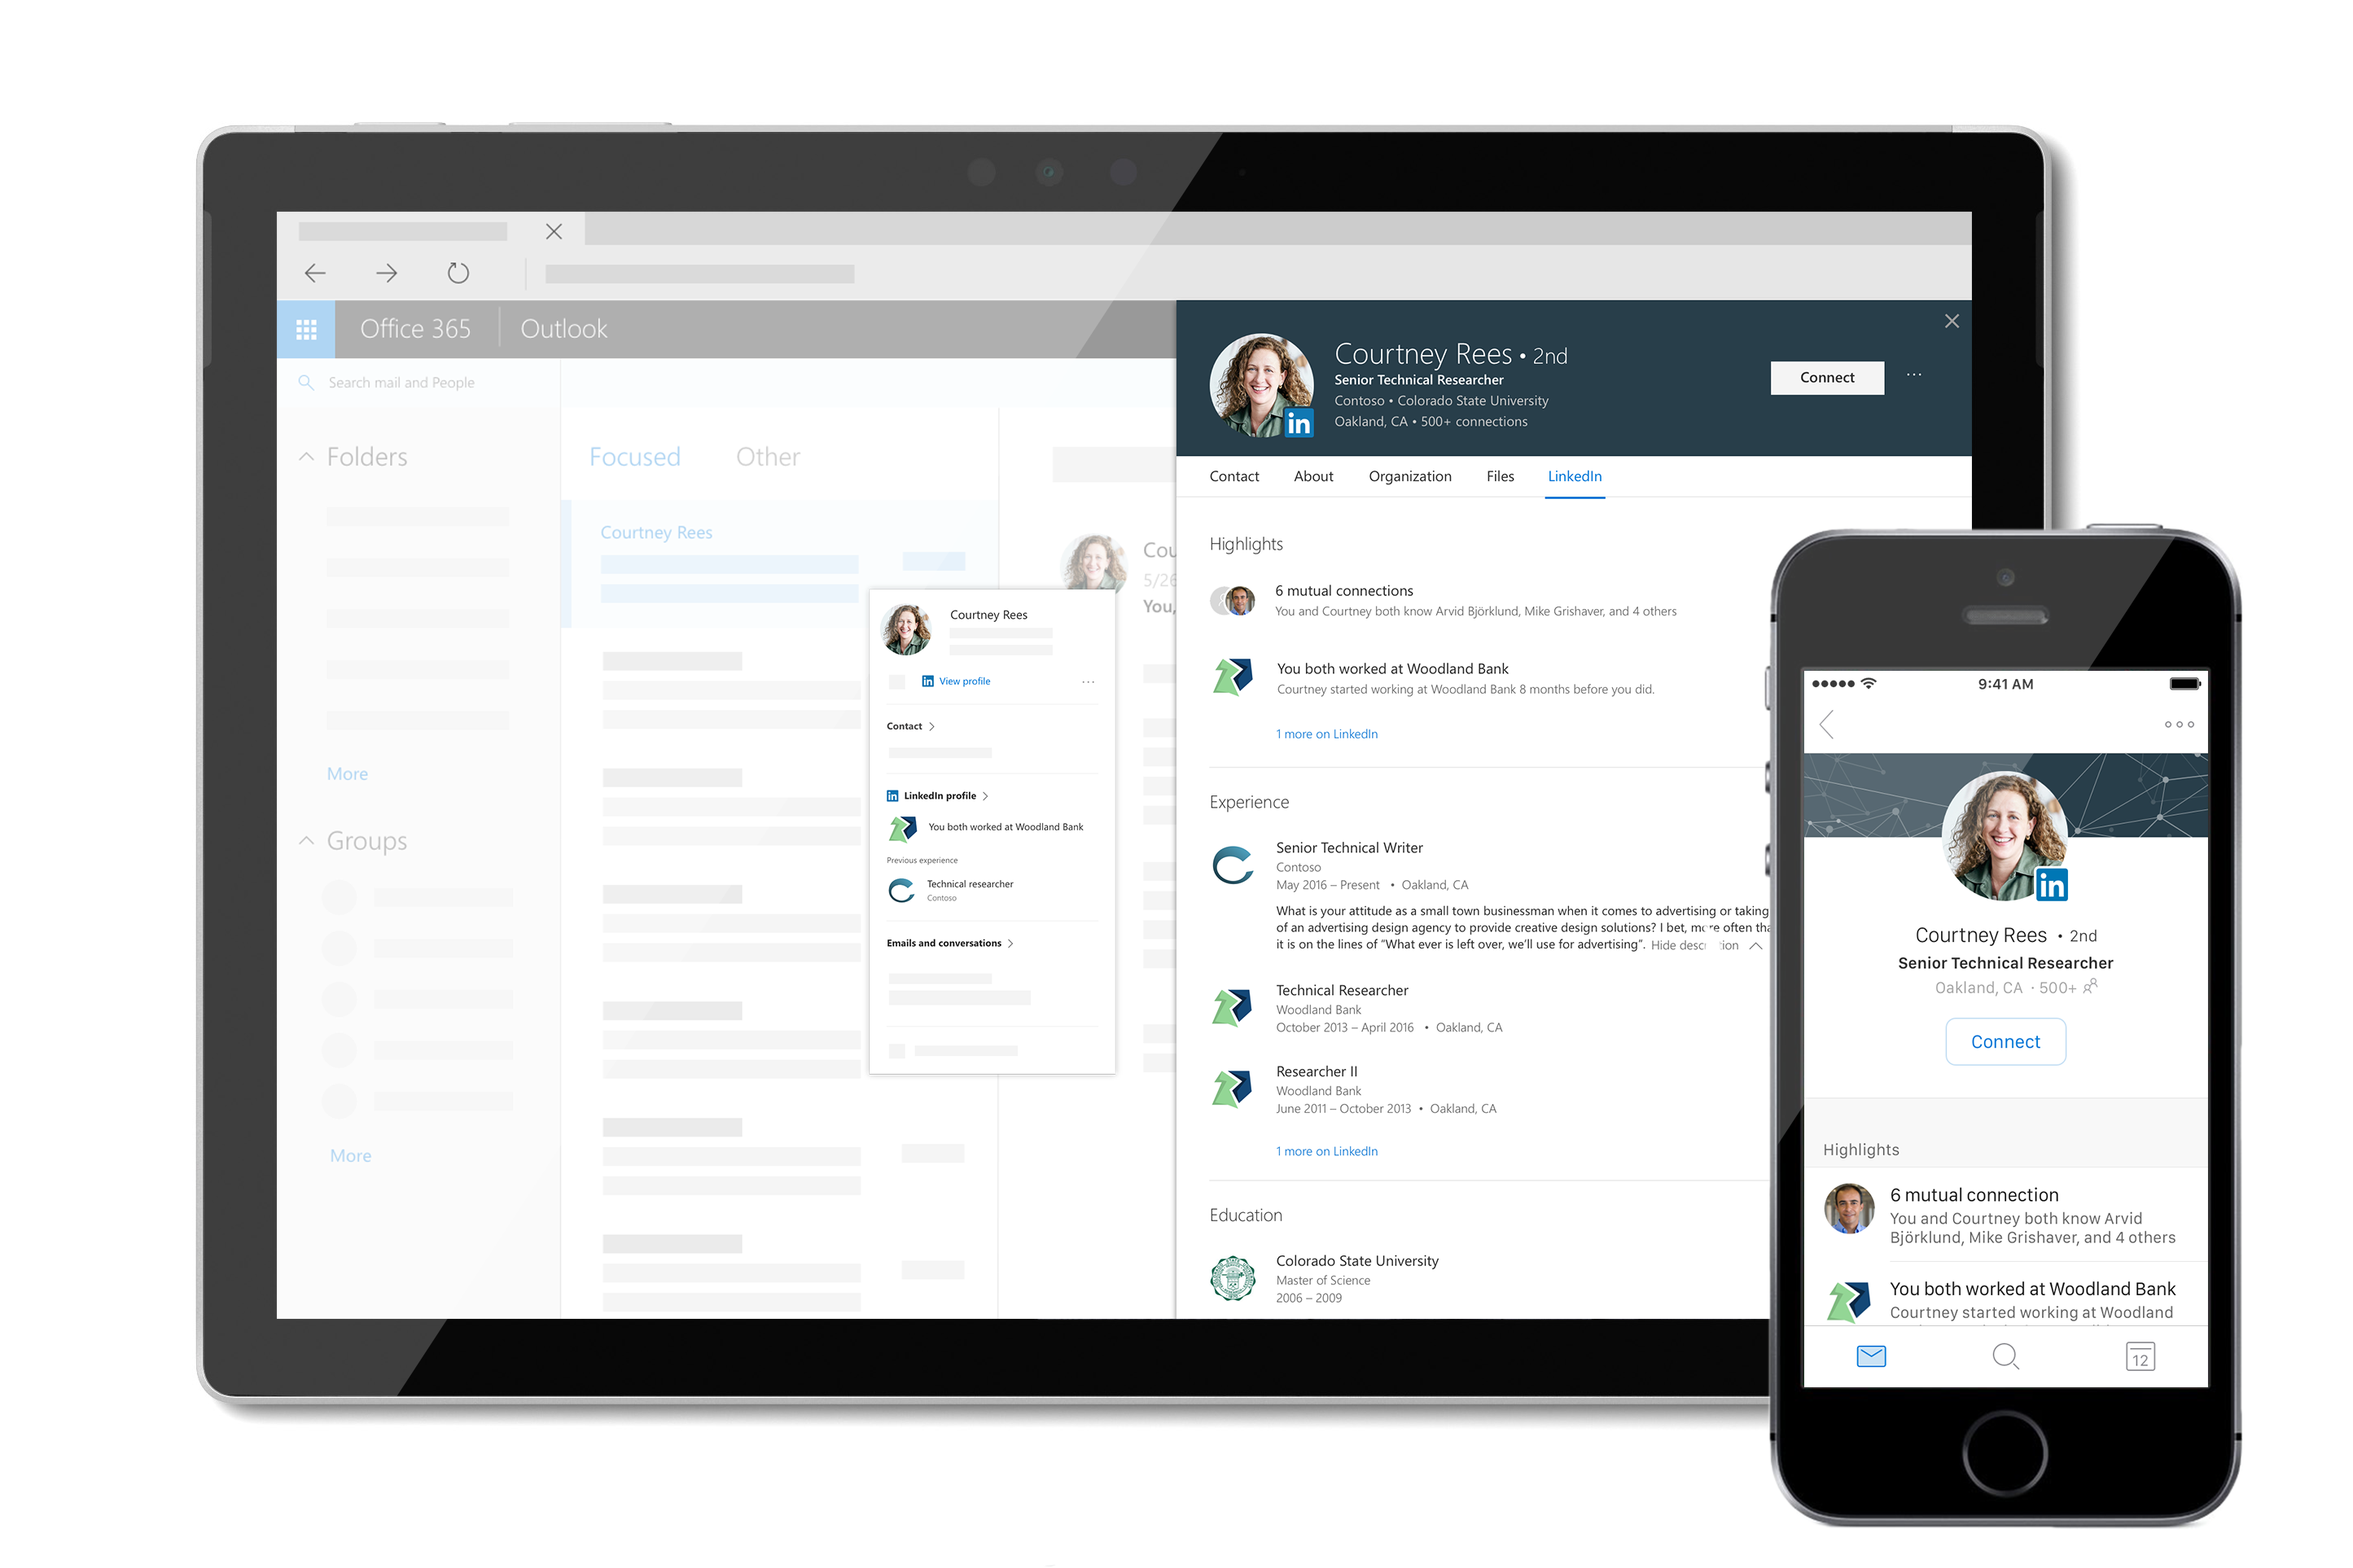 LinkedIn for Business Software - LinkedIn offers integration with the Profile Card in Office 365